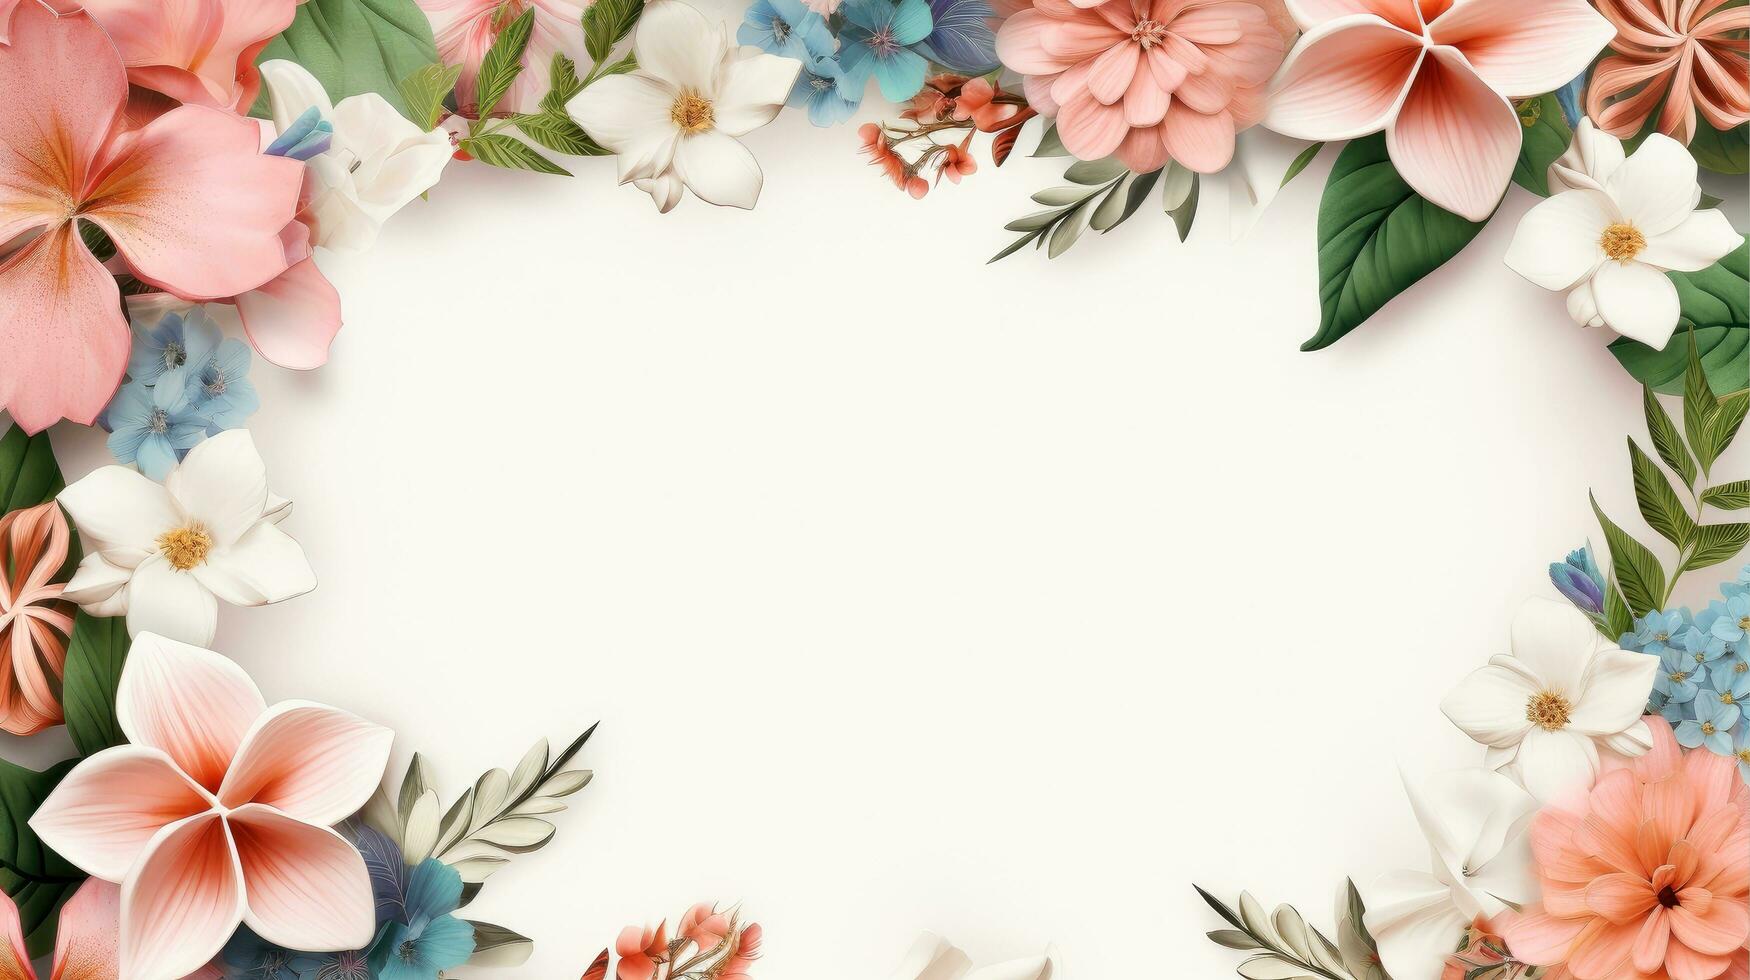 https://static.vecteezy.com/system/resources/previews/026/718/777/non_2x/floral-border-frame-card-template-multicolor-flowers-leaves-for-banner-wedding-card-springtime-composition-with-copy-space-generative-ai-illustration-free-photo.jpg